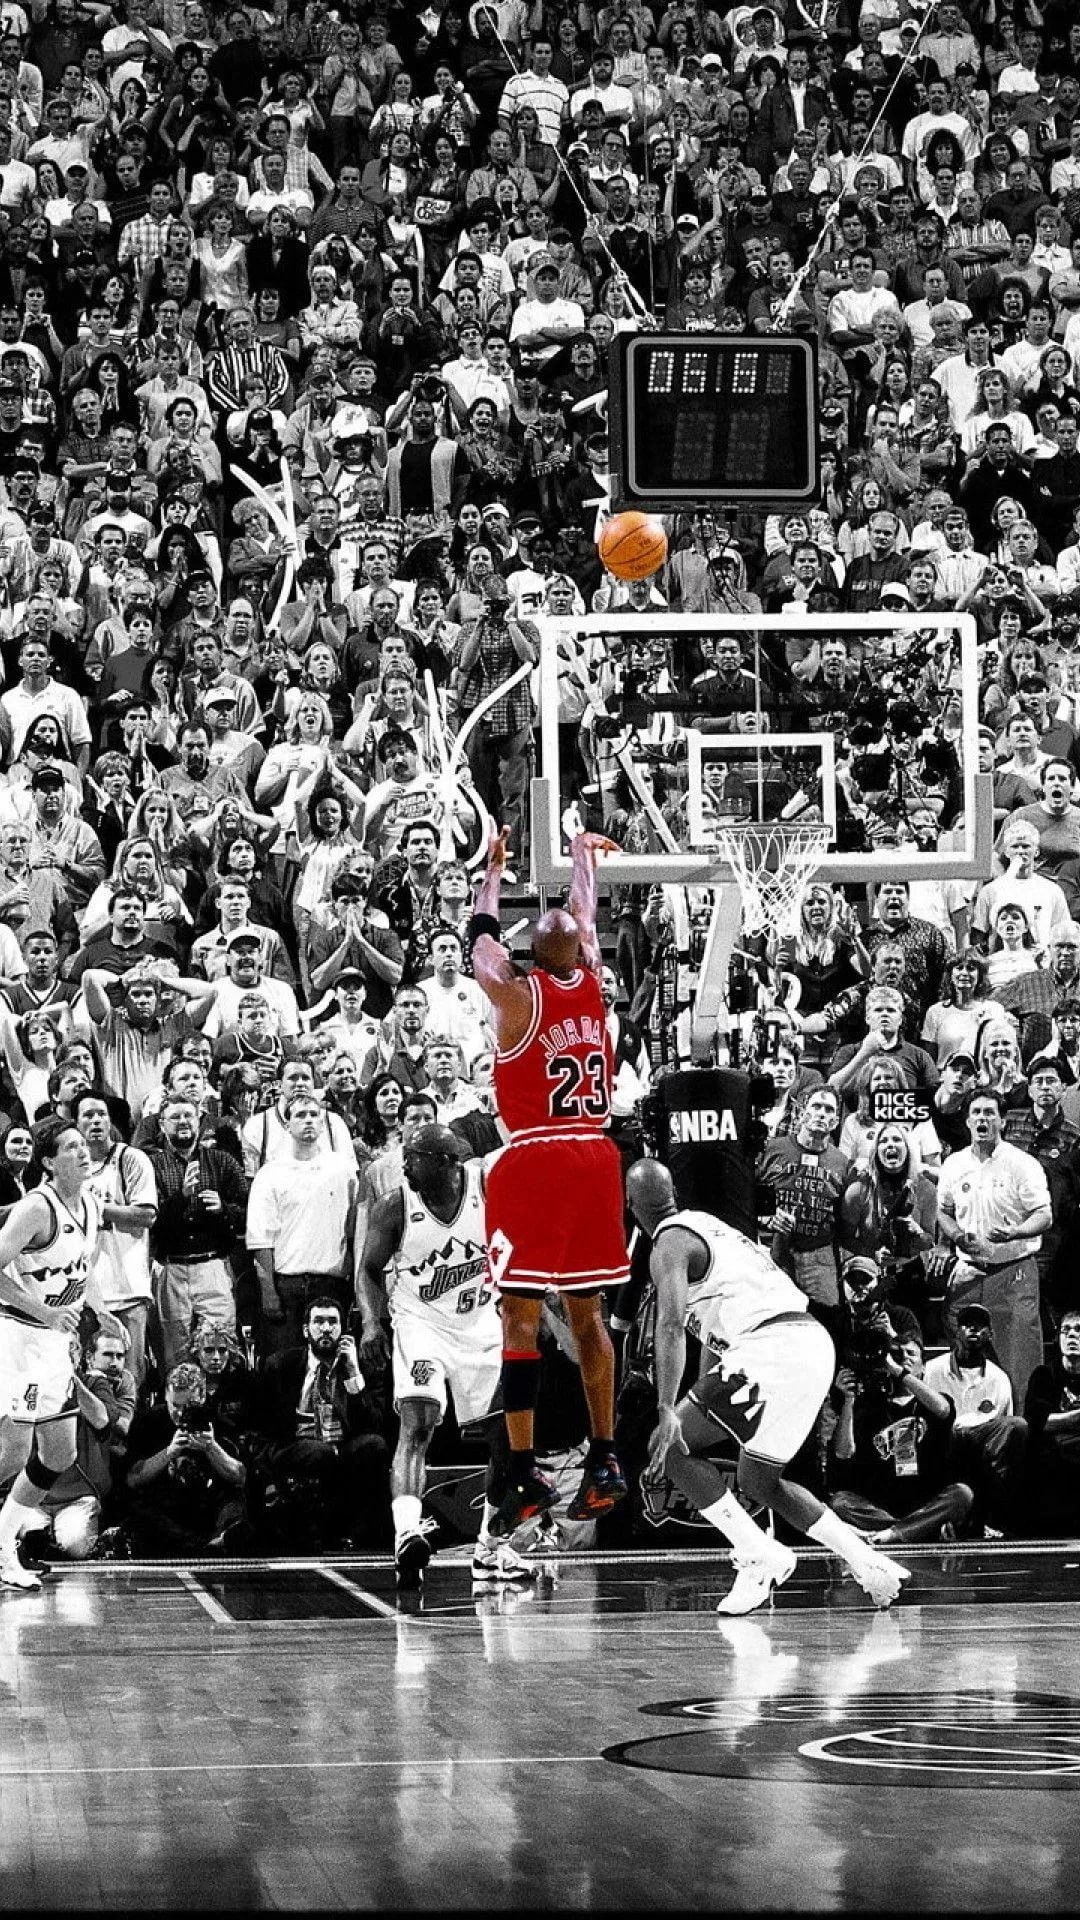 Michael Jordan shot in the air in front of a large crowd. - Basketball